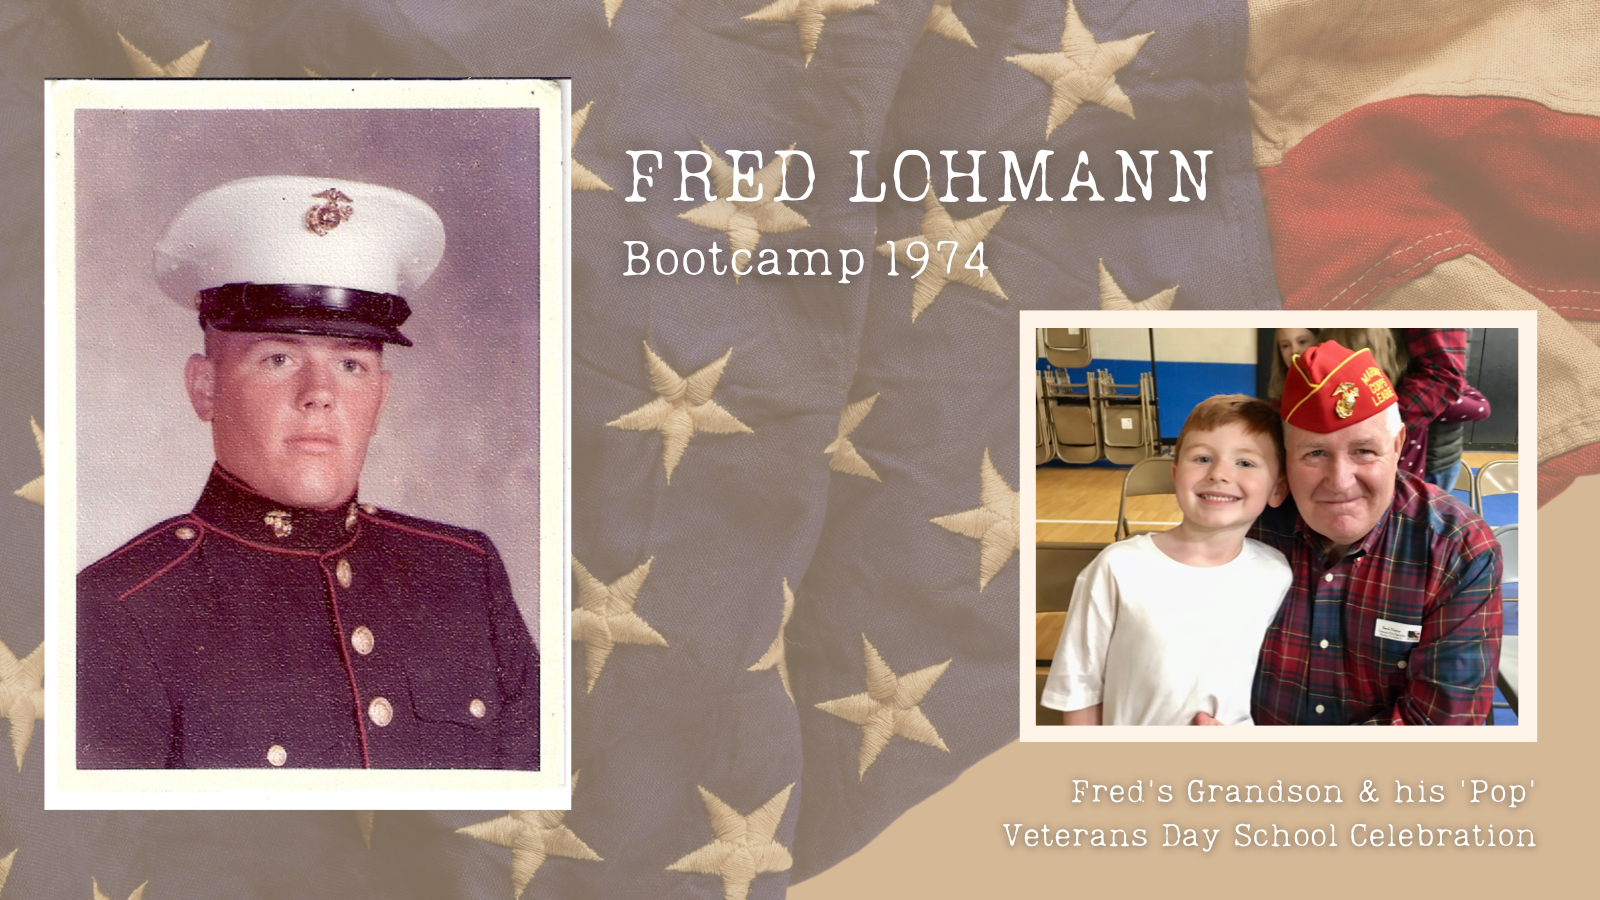 Fred Lohmann Bootcamp and Grandson